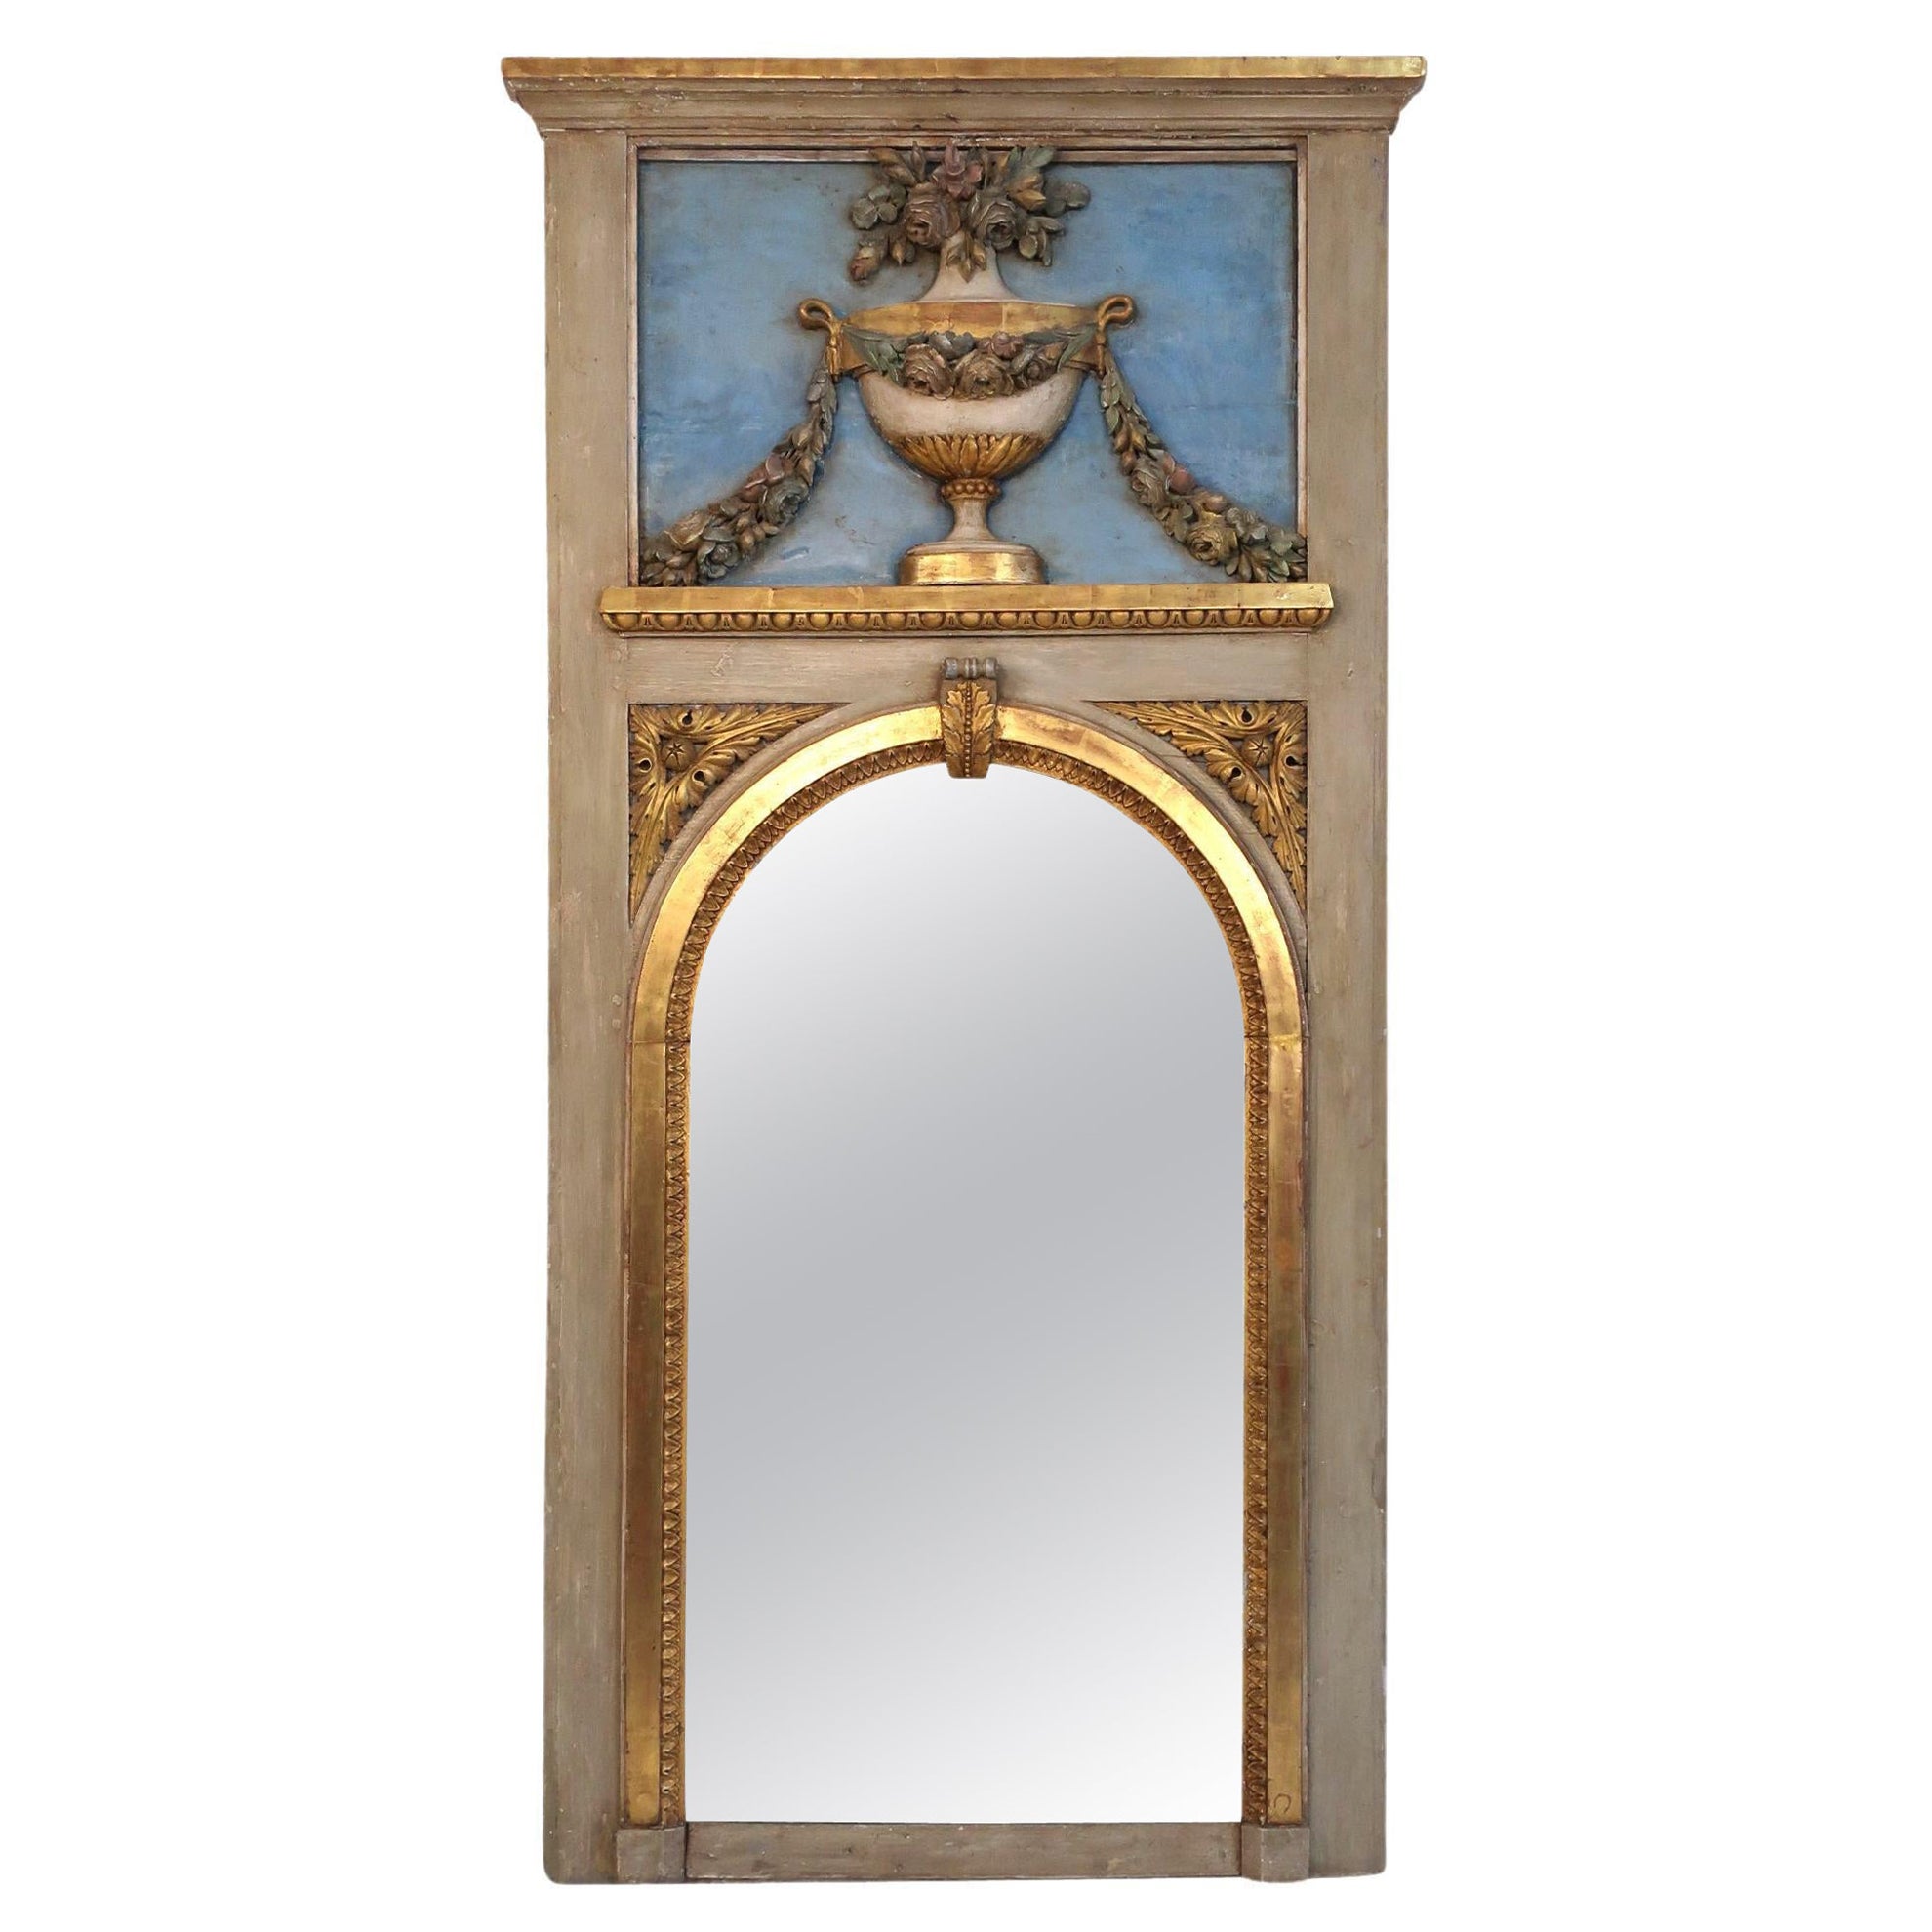 19th Century Blue Trumeau Mirror with Urn, Garland and Floral Decoration  For Sale